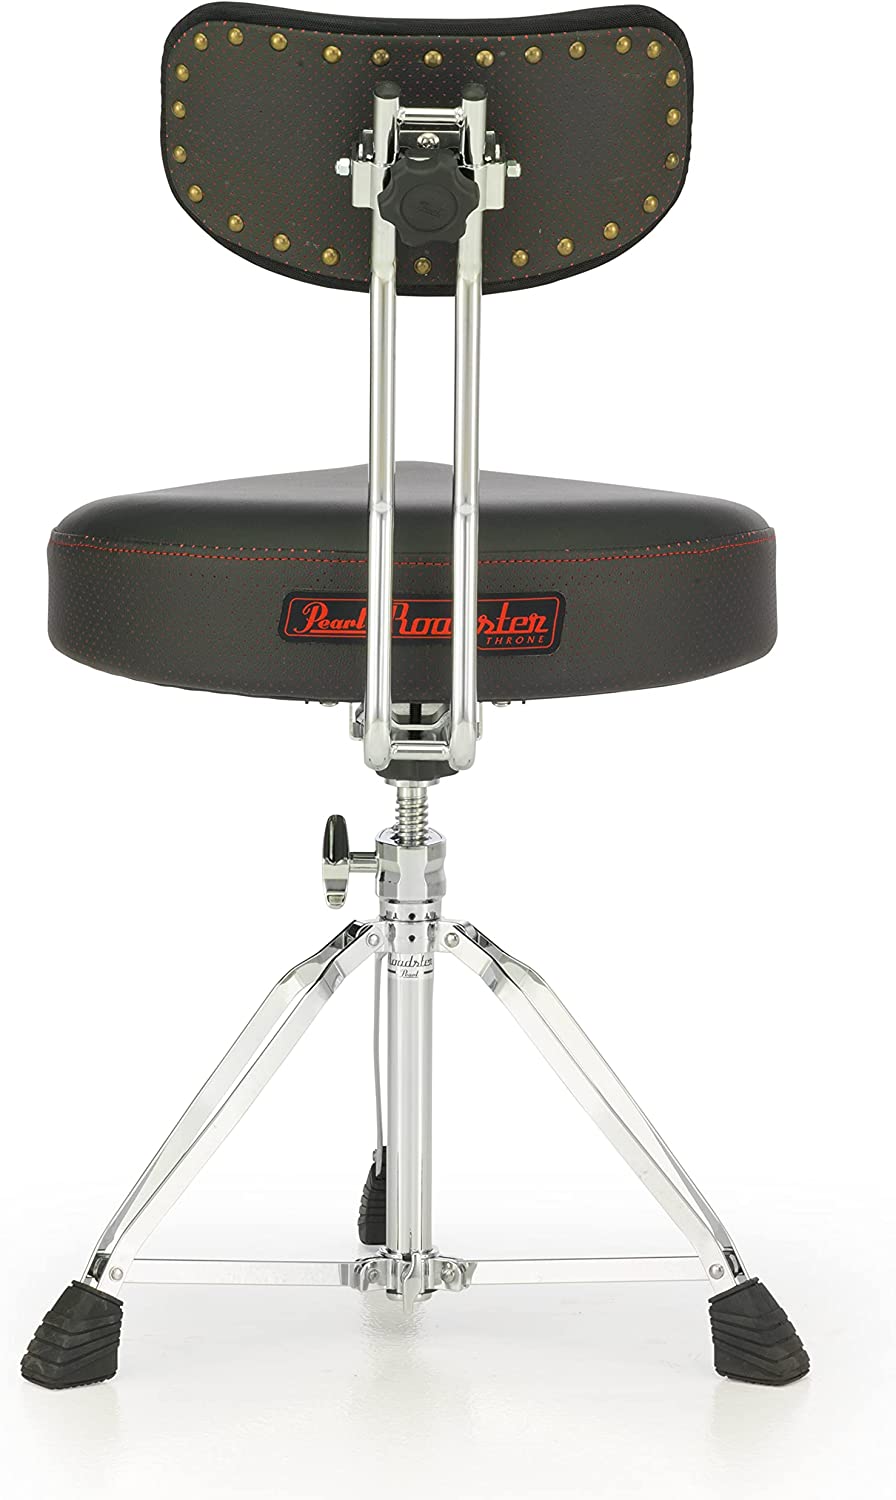 –　Style　Music　Backrest　Pearl　Throne　With　Rockit　Roadster　Canada　Saddle　D-3500BR